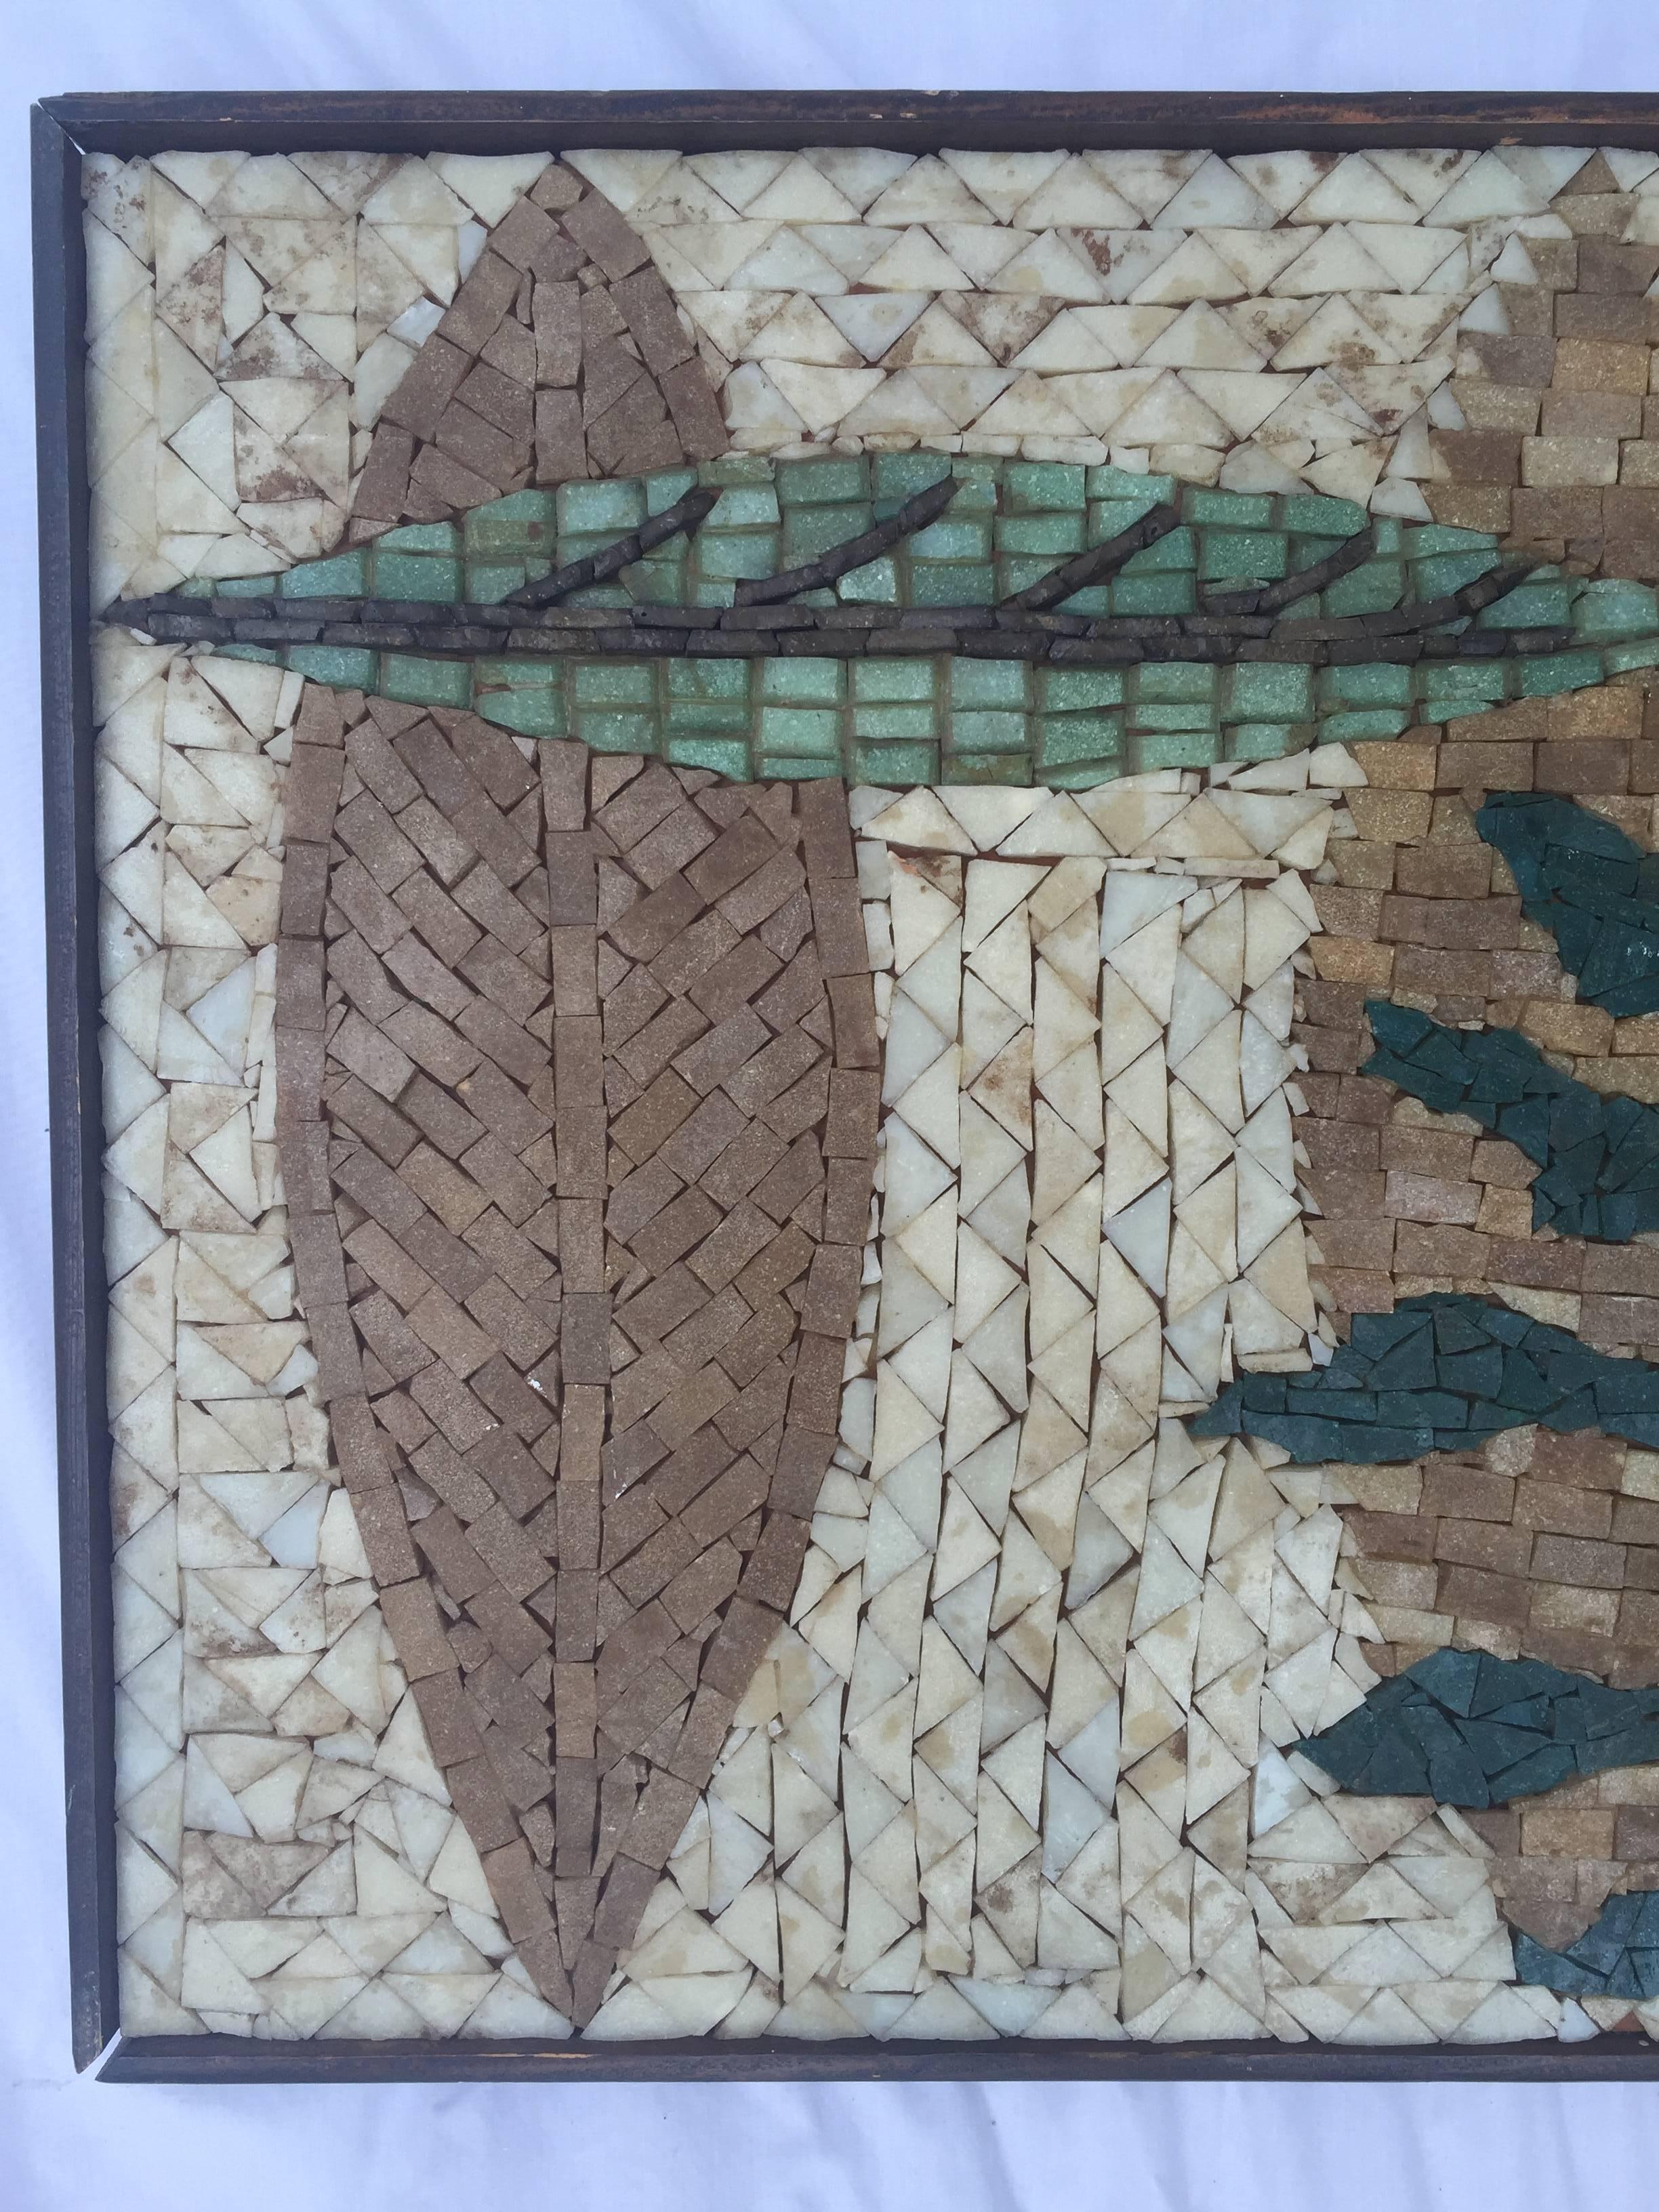 This Mid-Century wall mosaic is very much in the style of Evelyn Ackerman. Evelyn and Jerome Ackerman were Los Angeles based designers who created art for over 50 years. They were included in every exhibition of California Design from 1954-1976.